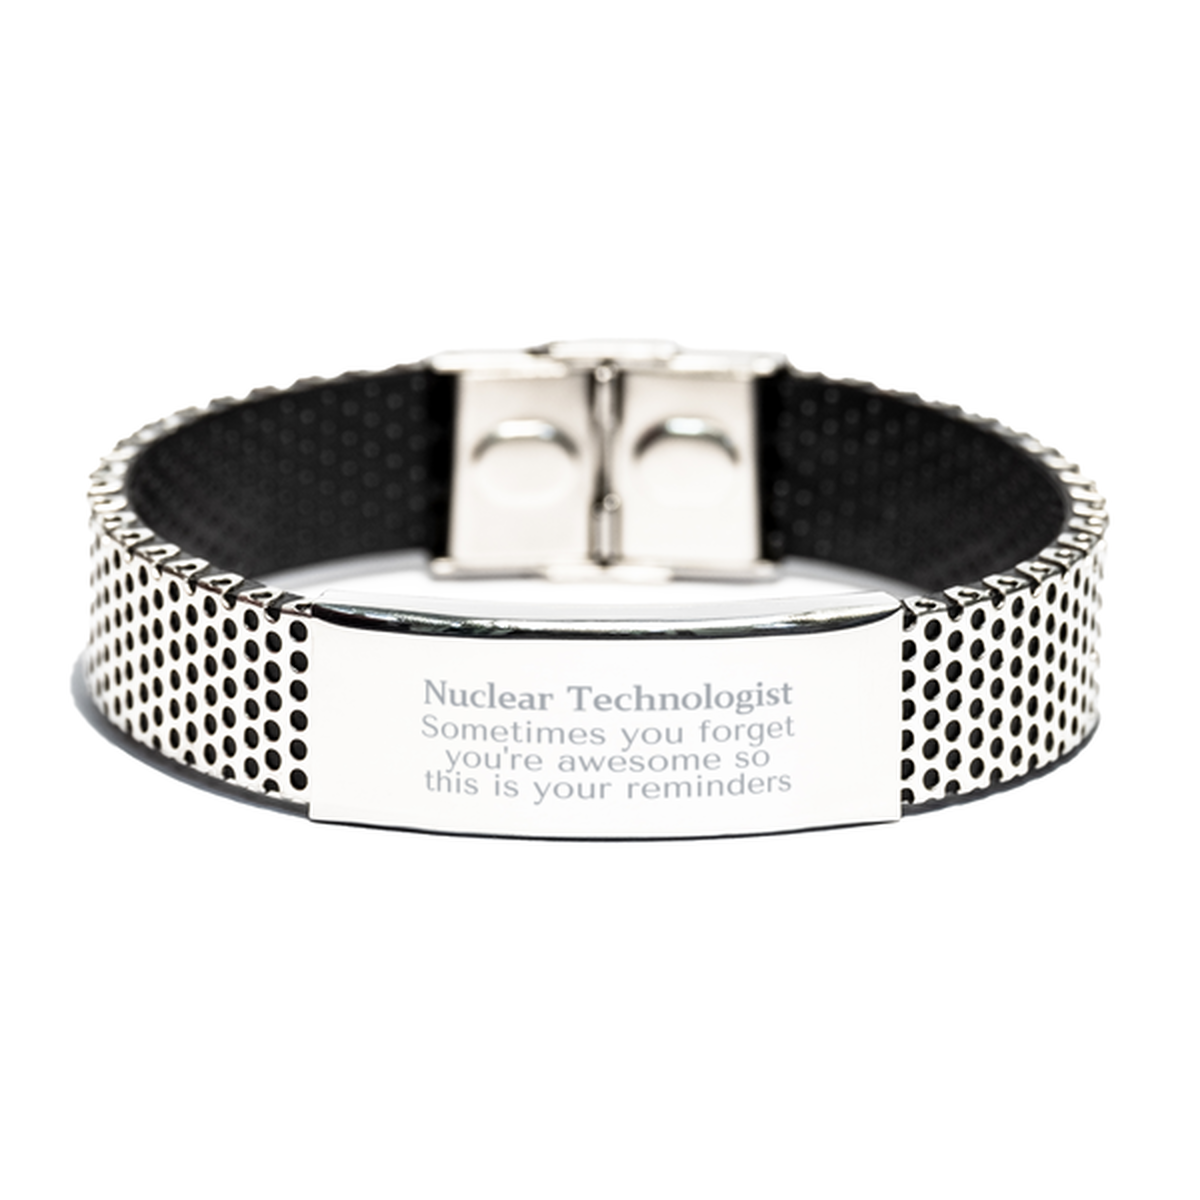 Sentimental Nuclear Technologist Stainless Steel Bracelet, Nuclear Technologist Sometimes you forget you're awesome so this is your reminders, Graduation Christmas Birthday Gifts for Nuclear Technologist, Men, Women, Coworkers